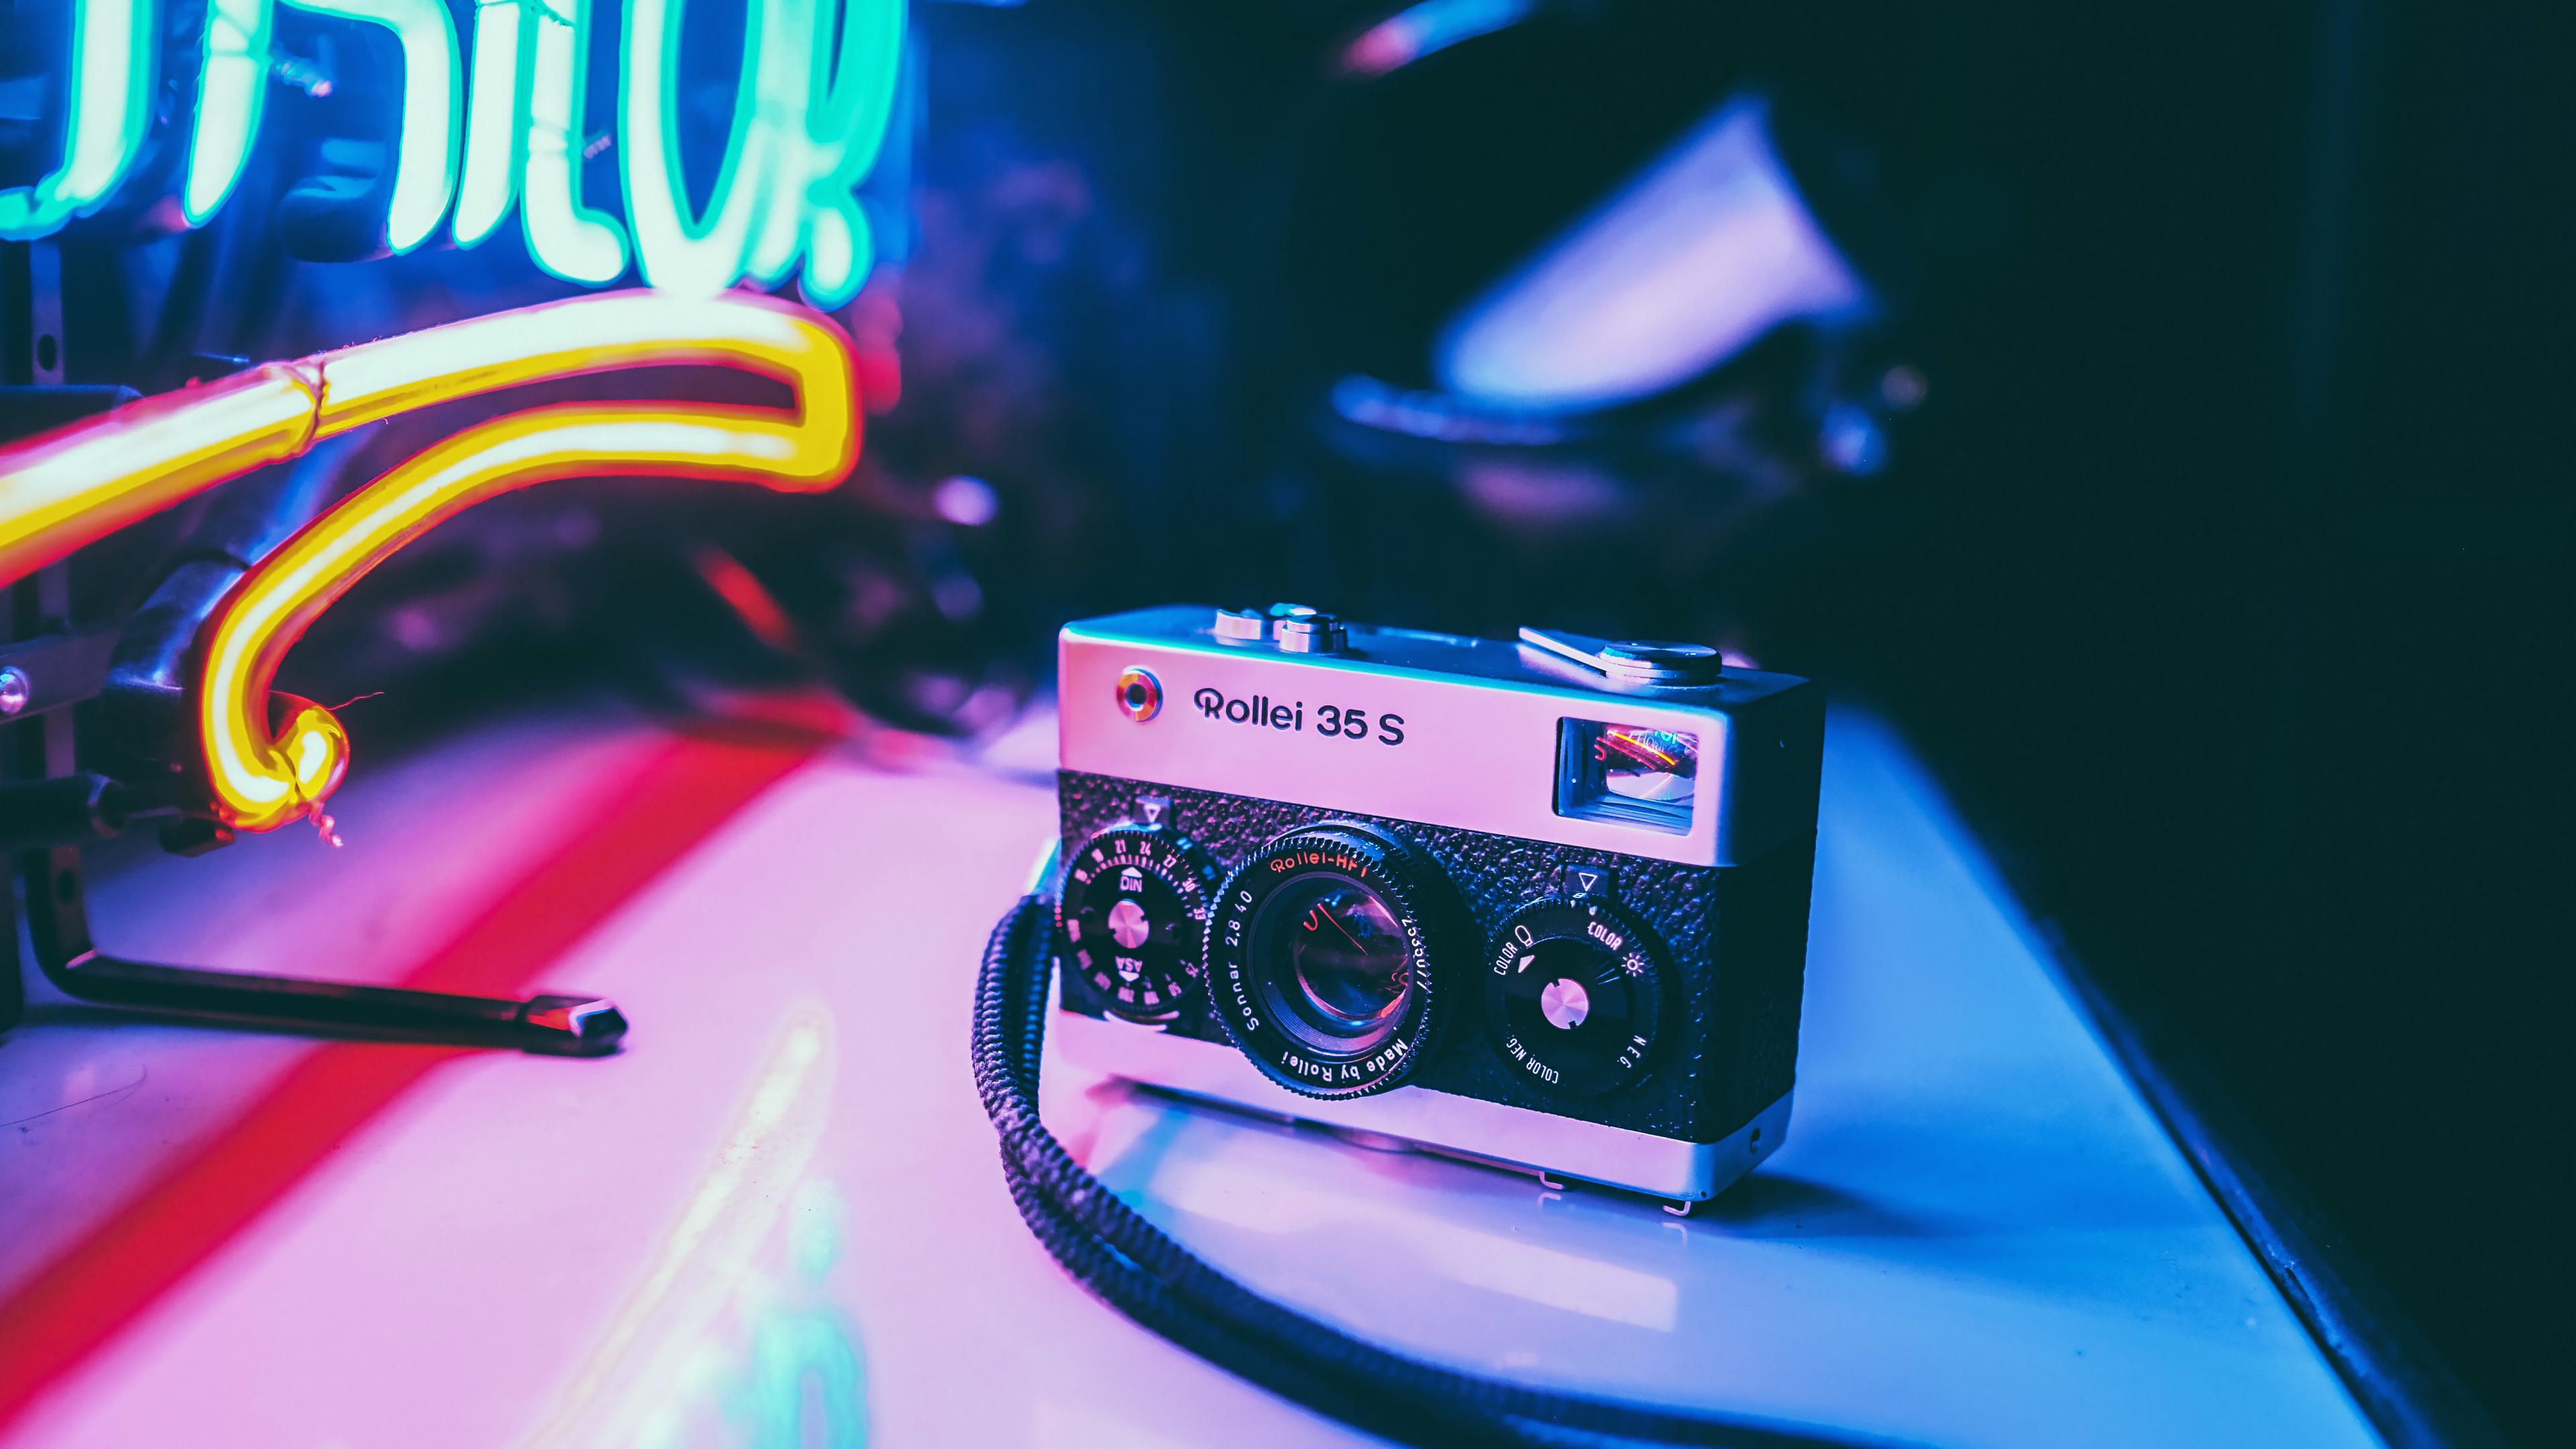 Vintage camera Rollei 35s with neon lights Wallpaper 4k Ultra HD